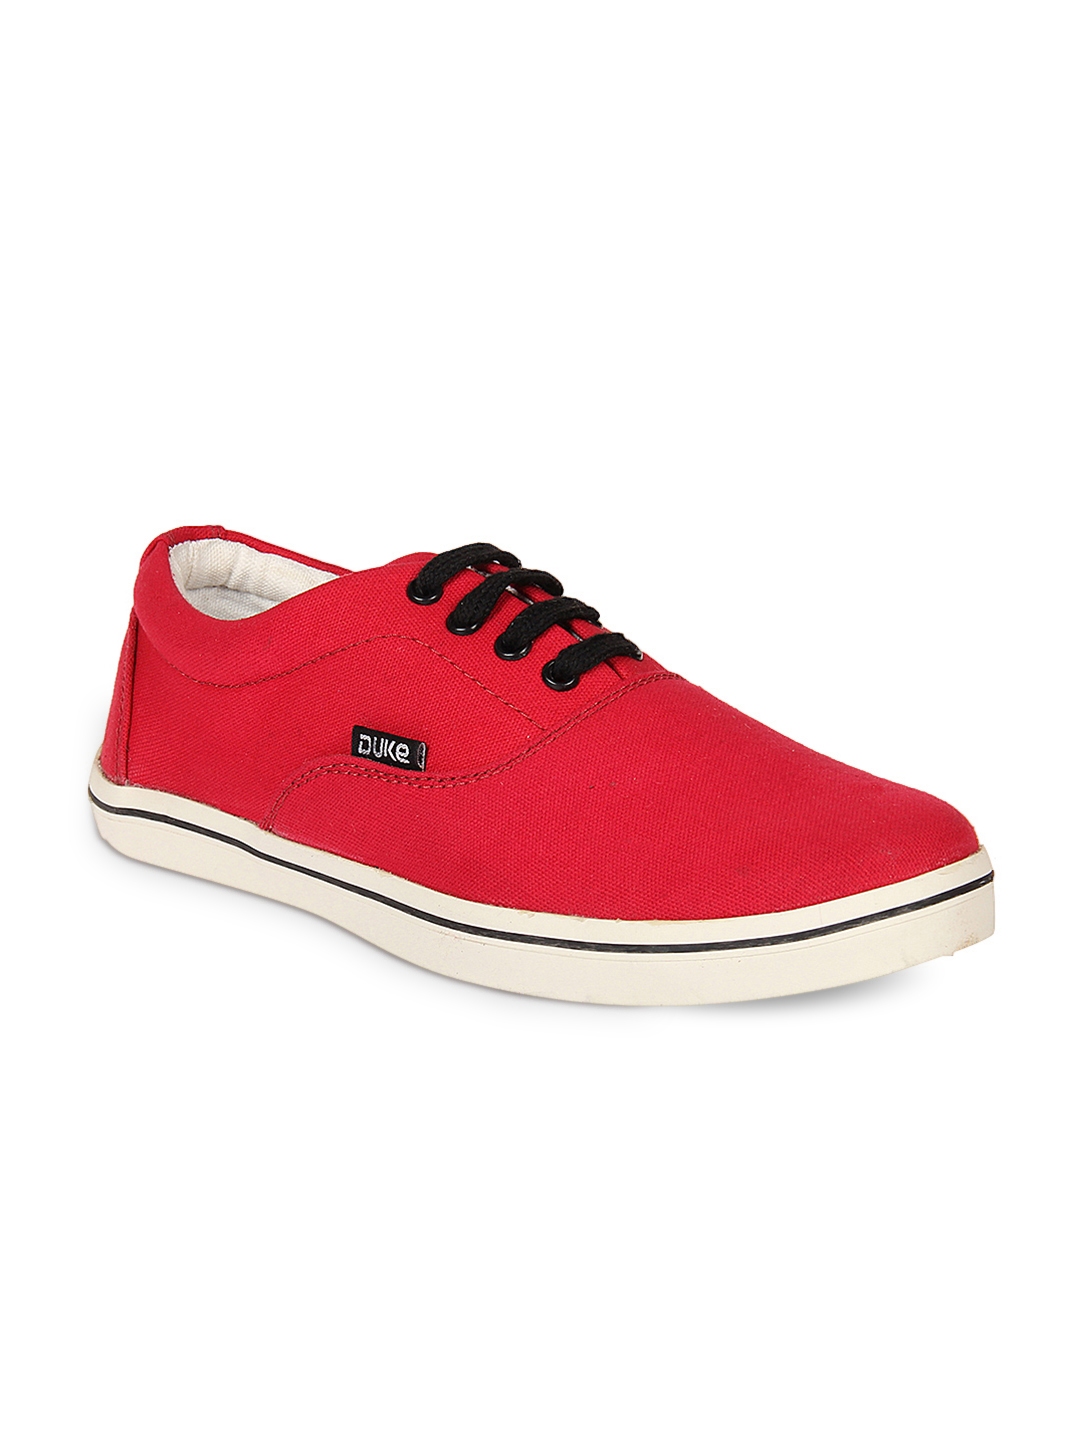 Buy Duke Men Red Solid Sneakers - Casual Shoes for Men 2176250 | Myntra